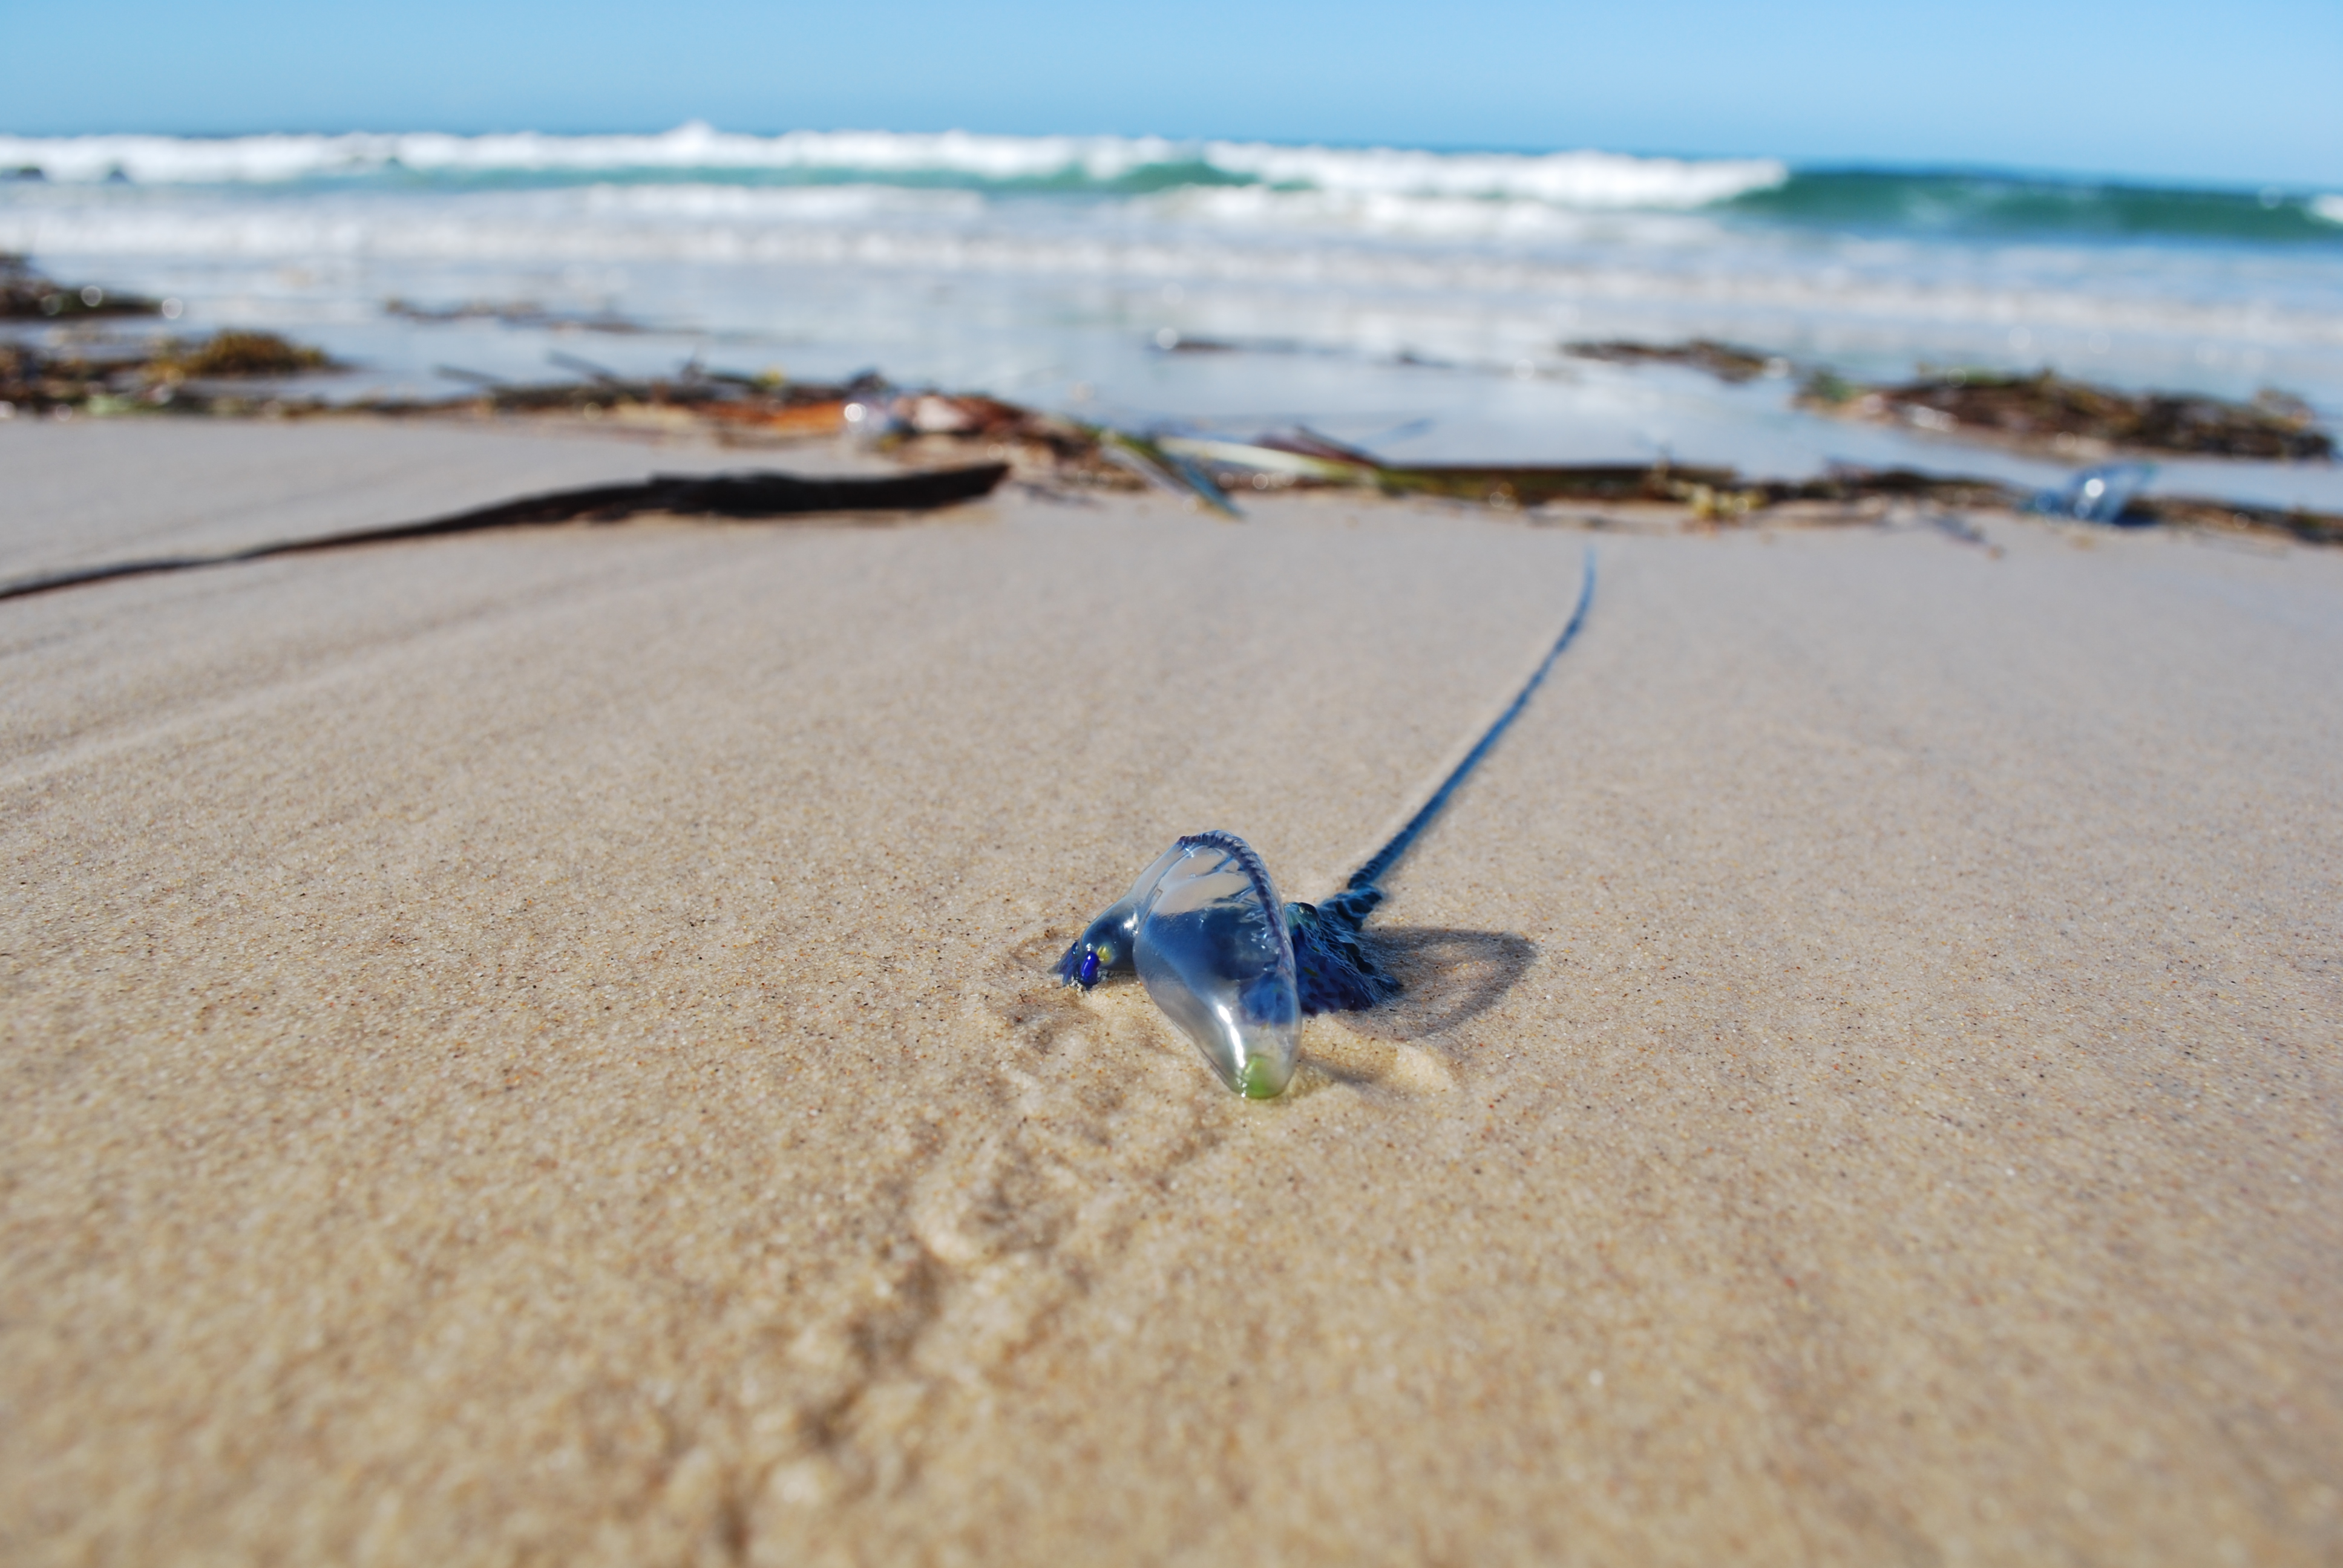 A bluebottle washed up on the sand. The long stinger trails out behind it. Australia